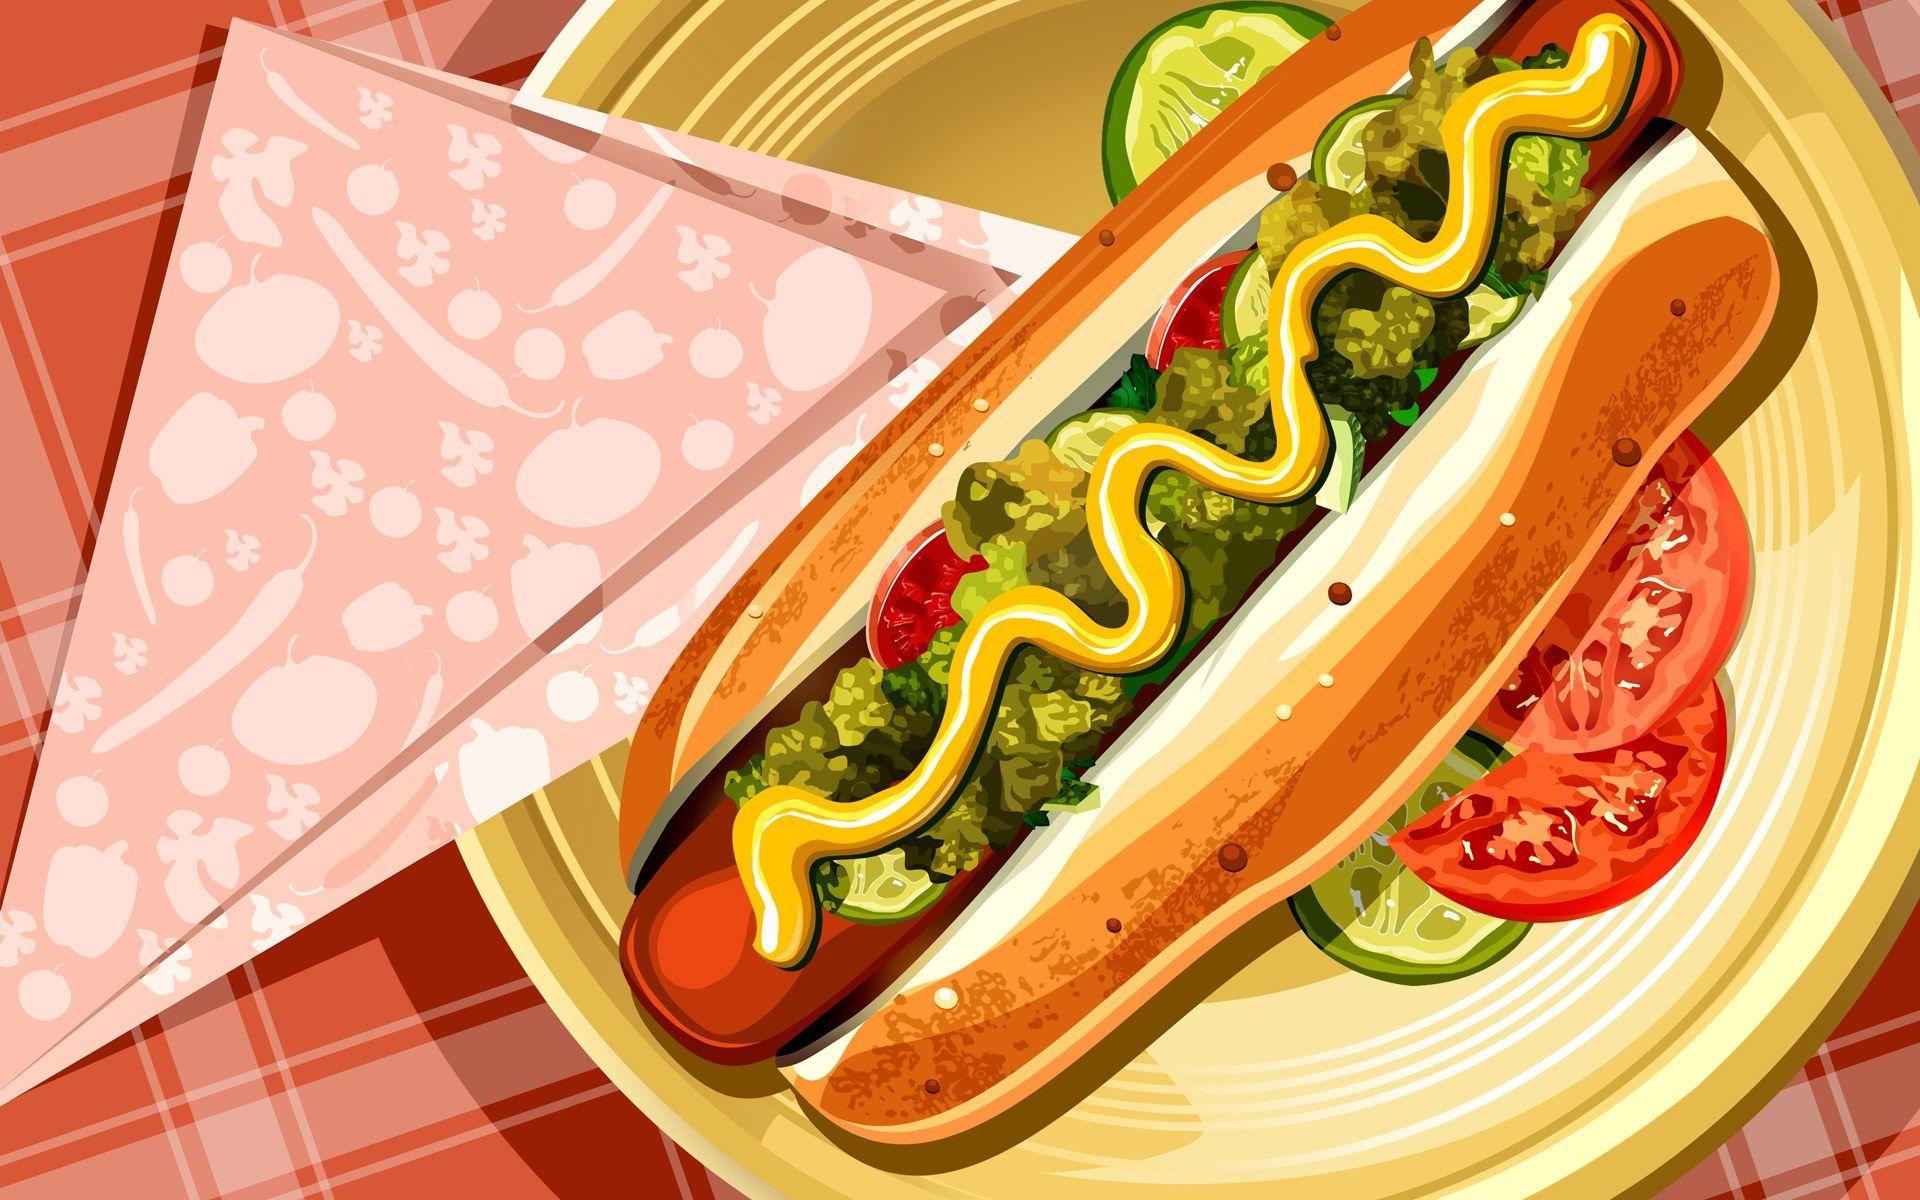 Hot Dog Photos Download The BEST Free Hot Dog Stock Photos  HD Images